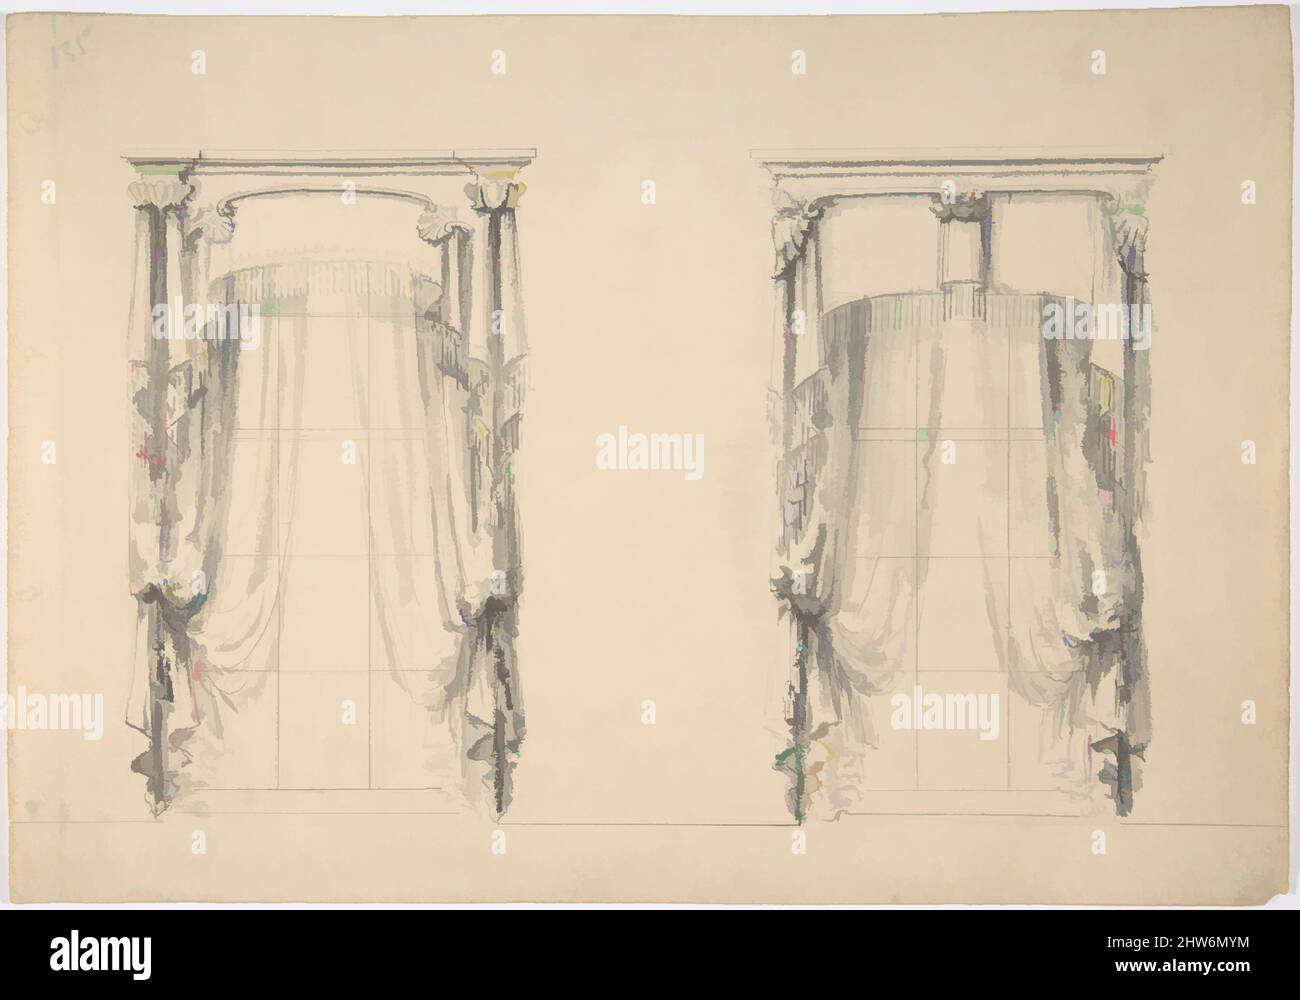 Art inspired by Design for Fringed Curtains Hanging at Two Windows, early 19th century, Ink and wash, sheet: 8 9/16 x 12 3/16 in. (21.7 x 31 cm), Anonymous, British, 19th century, Classic works modernized by Artotop with a splash of modernity. Shapes, color and value, eye-catching visual impact on art. Emotions through freedom of artworks in a contemporary way. A timeless message pursuing a wildly creative new direction. Artists turning to the digital medium and creating the Artotop NFT Stock Photo